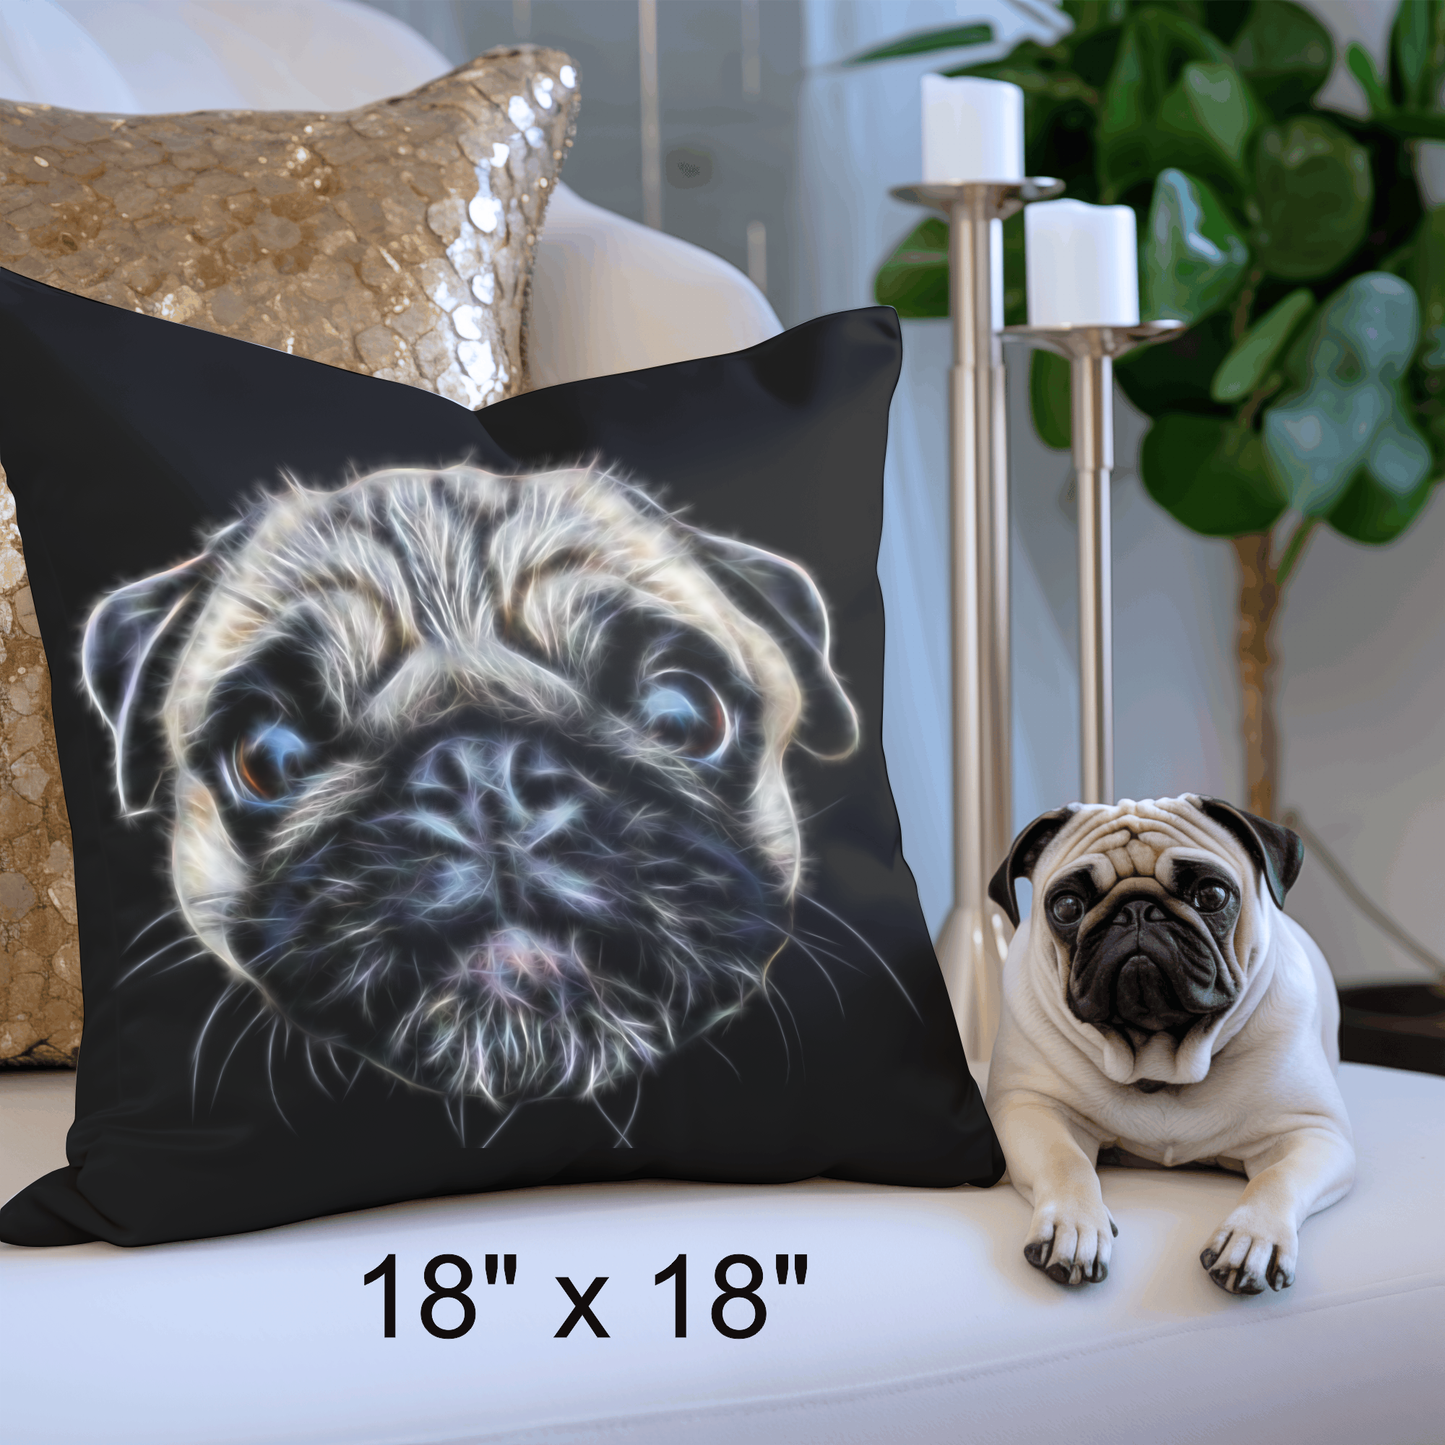 Chorkie Cushion with Pillow Insert